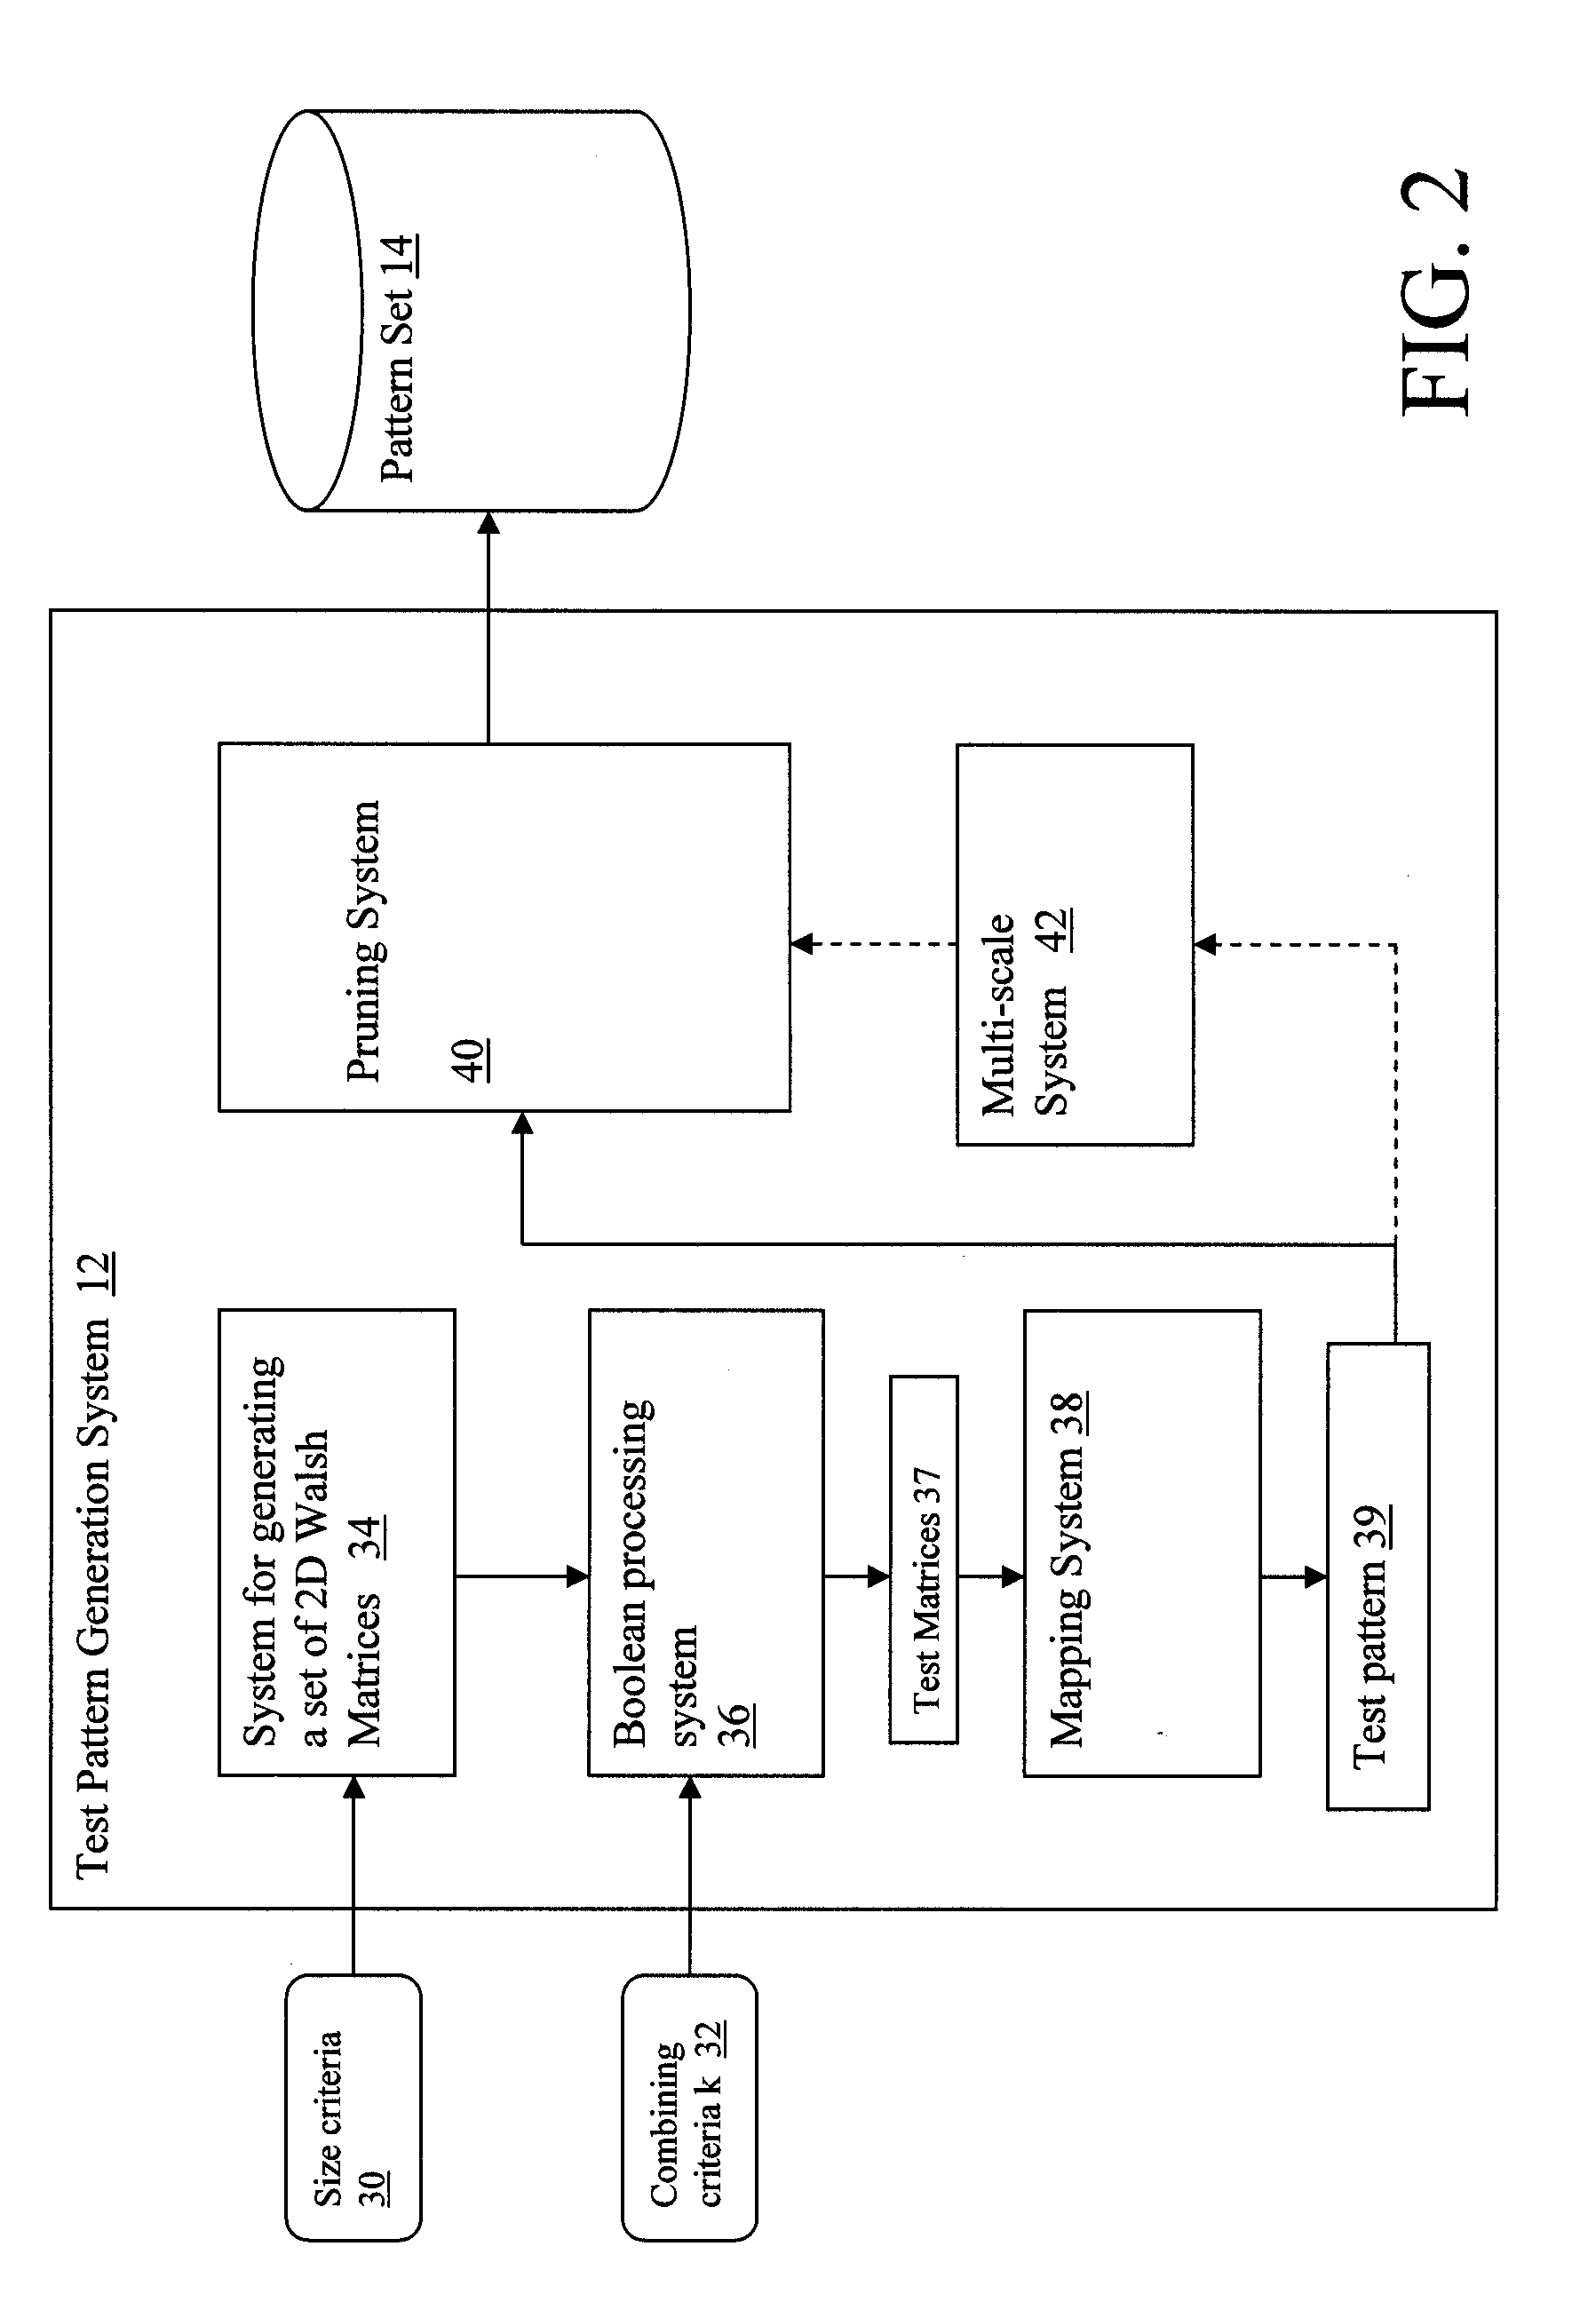 System and method for generating a set of test patterns for an optical proximity correction algorithm